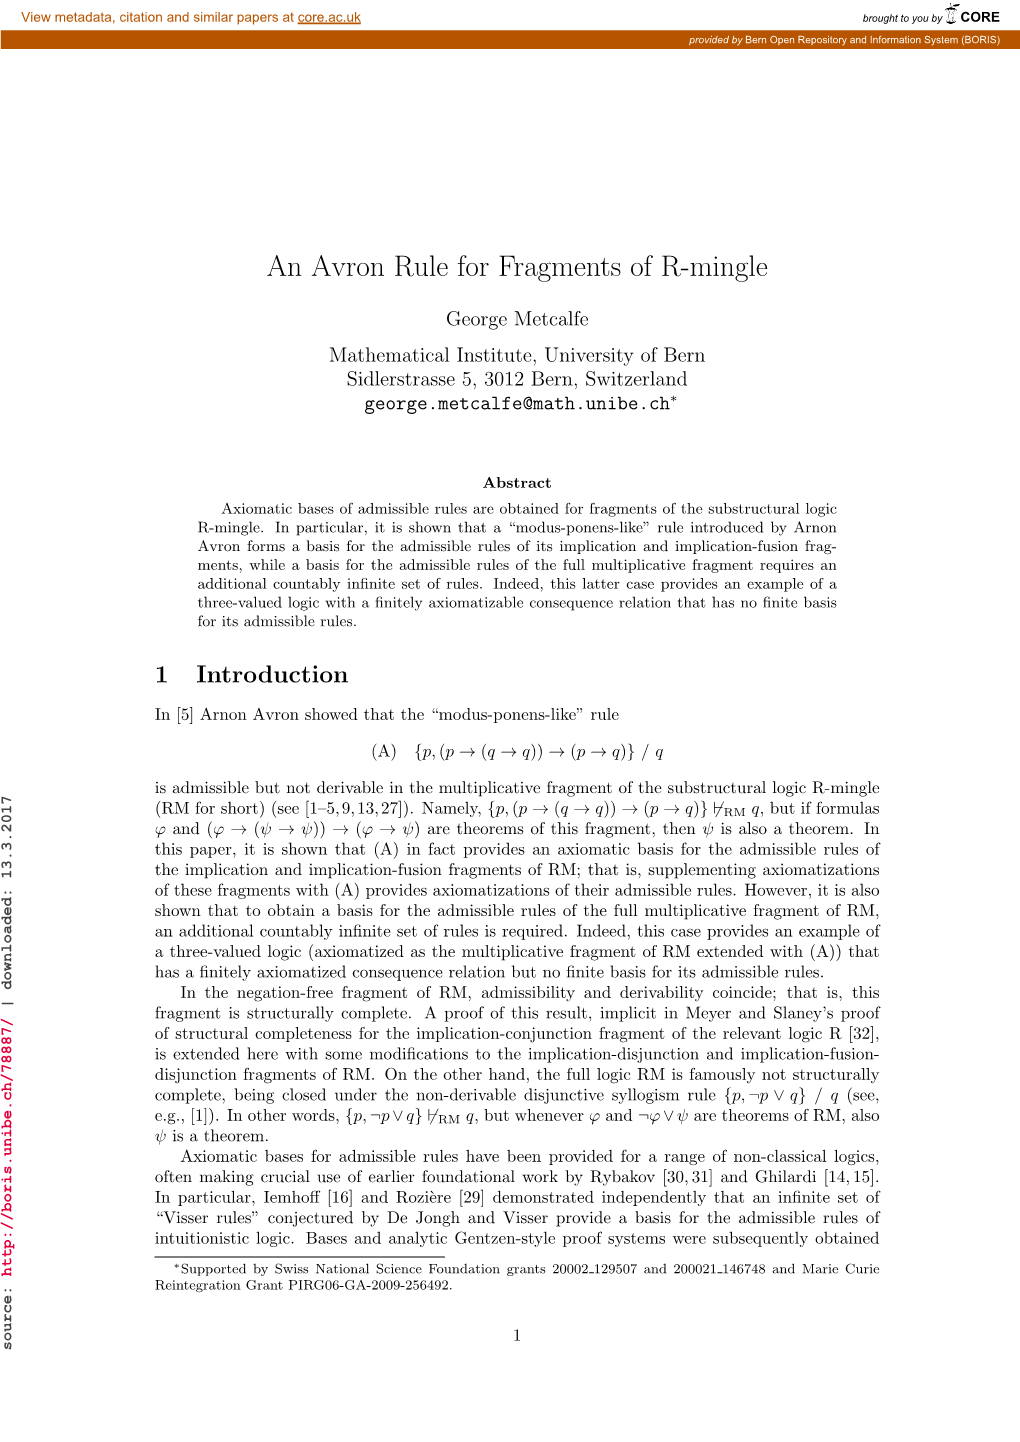 An Avron Rule for Fragments of R-Mingle